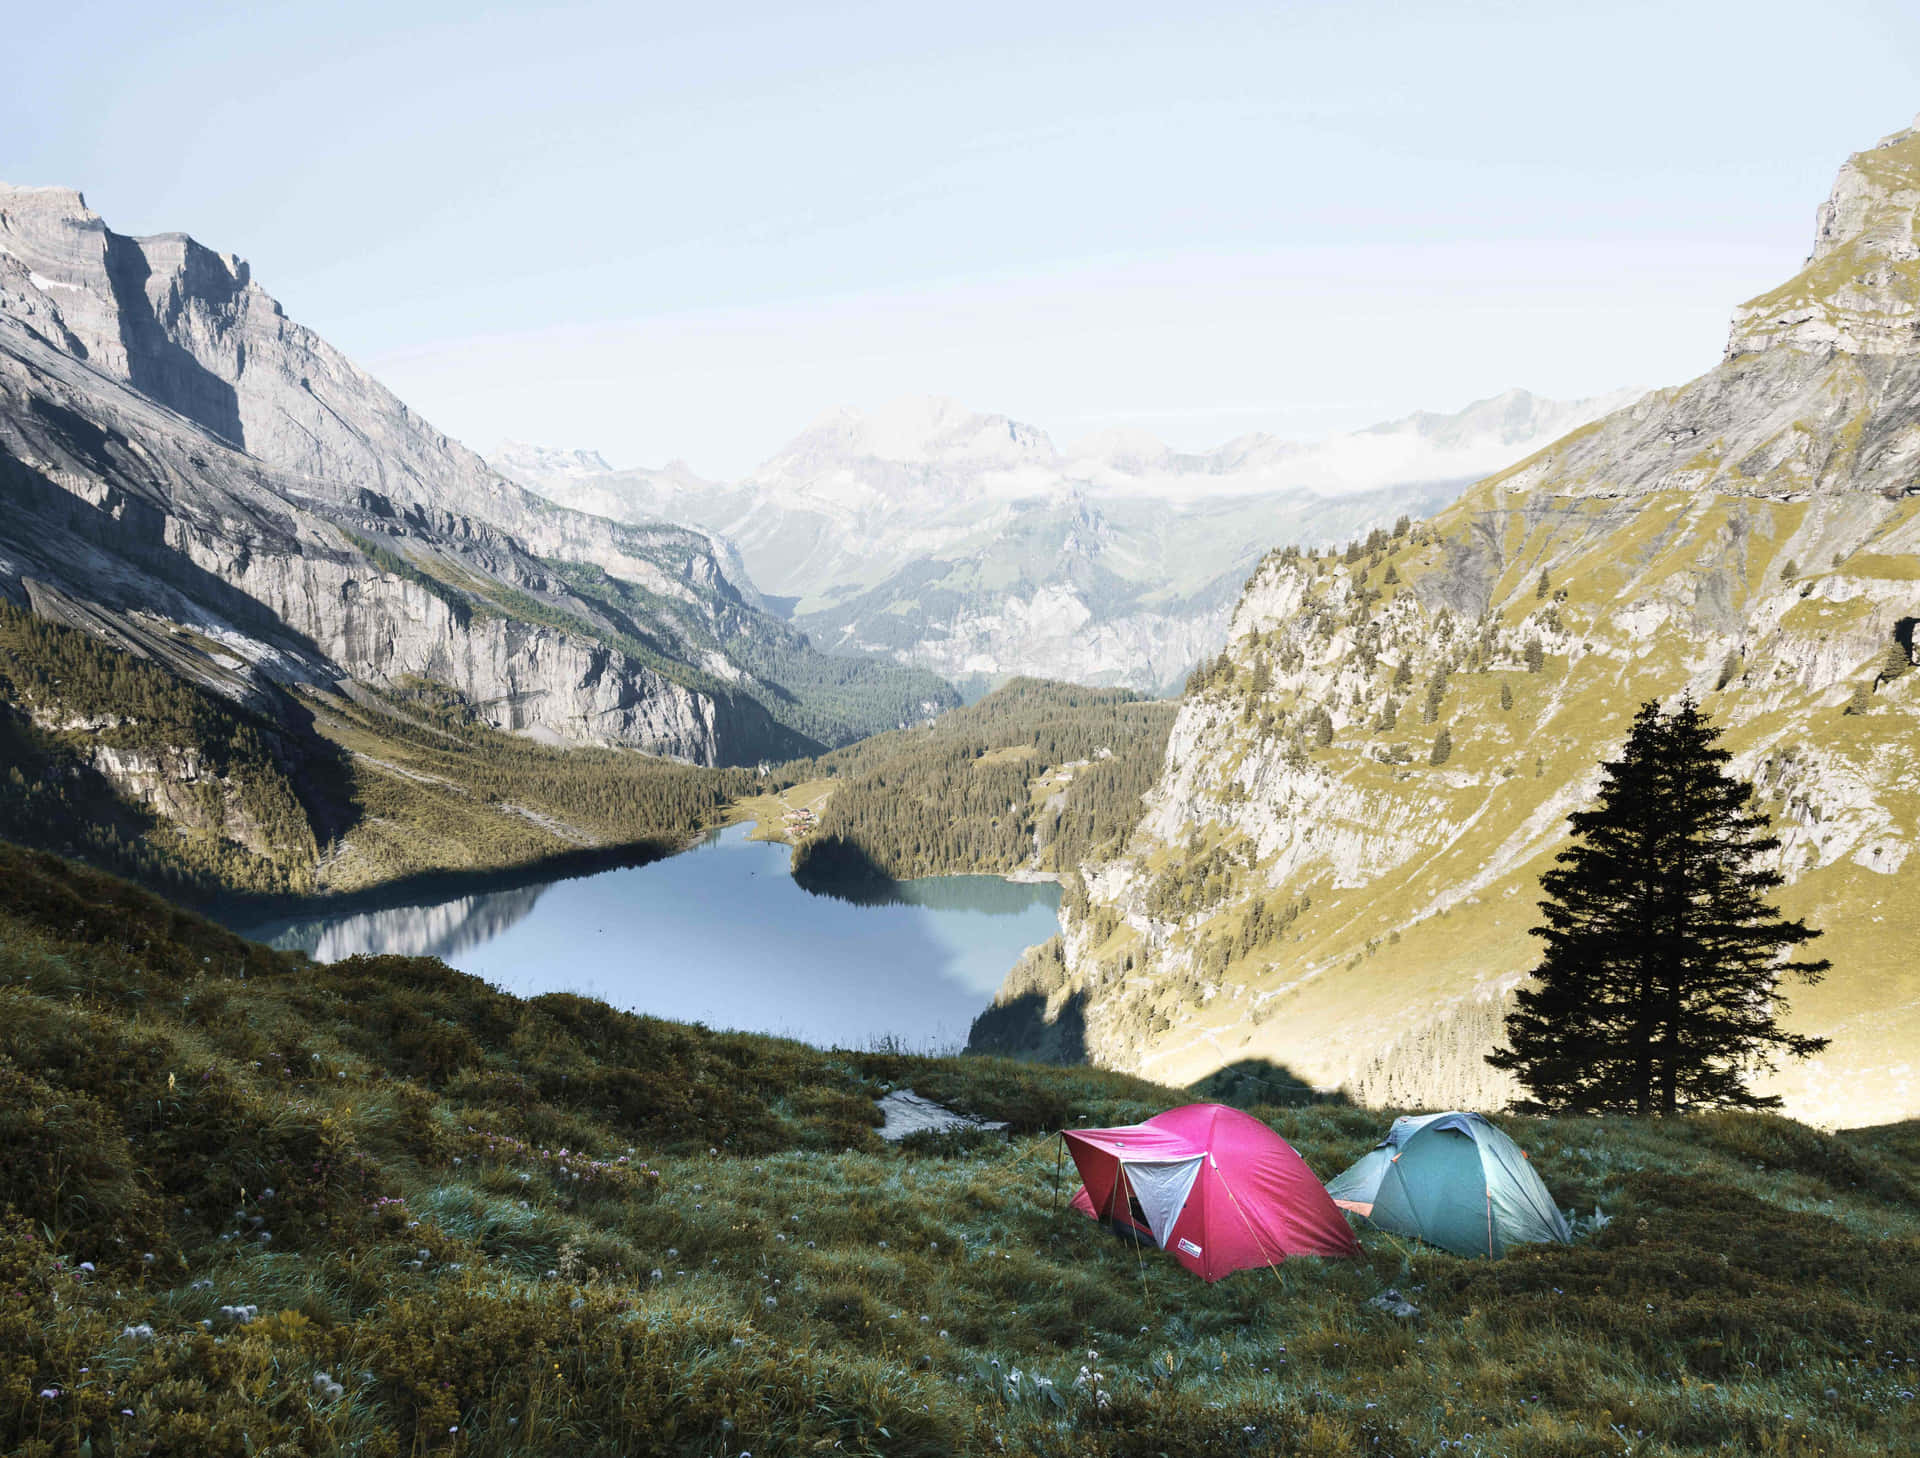 Camping Is A Perfect Way To Get In Touch With Nature